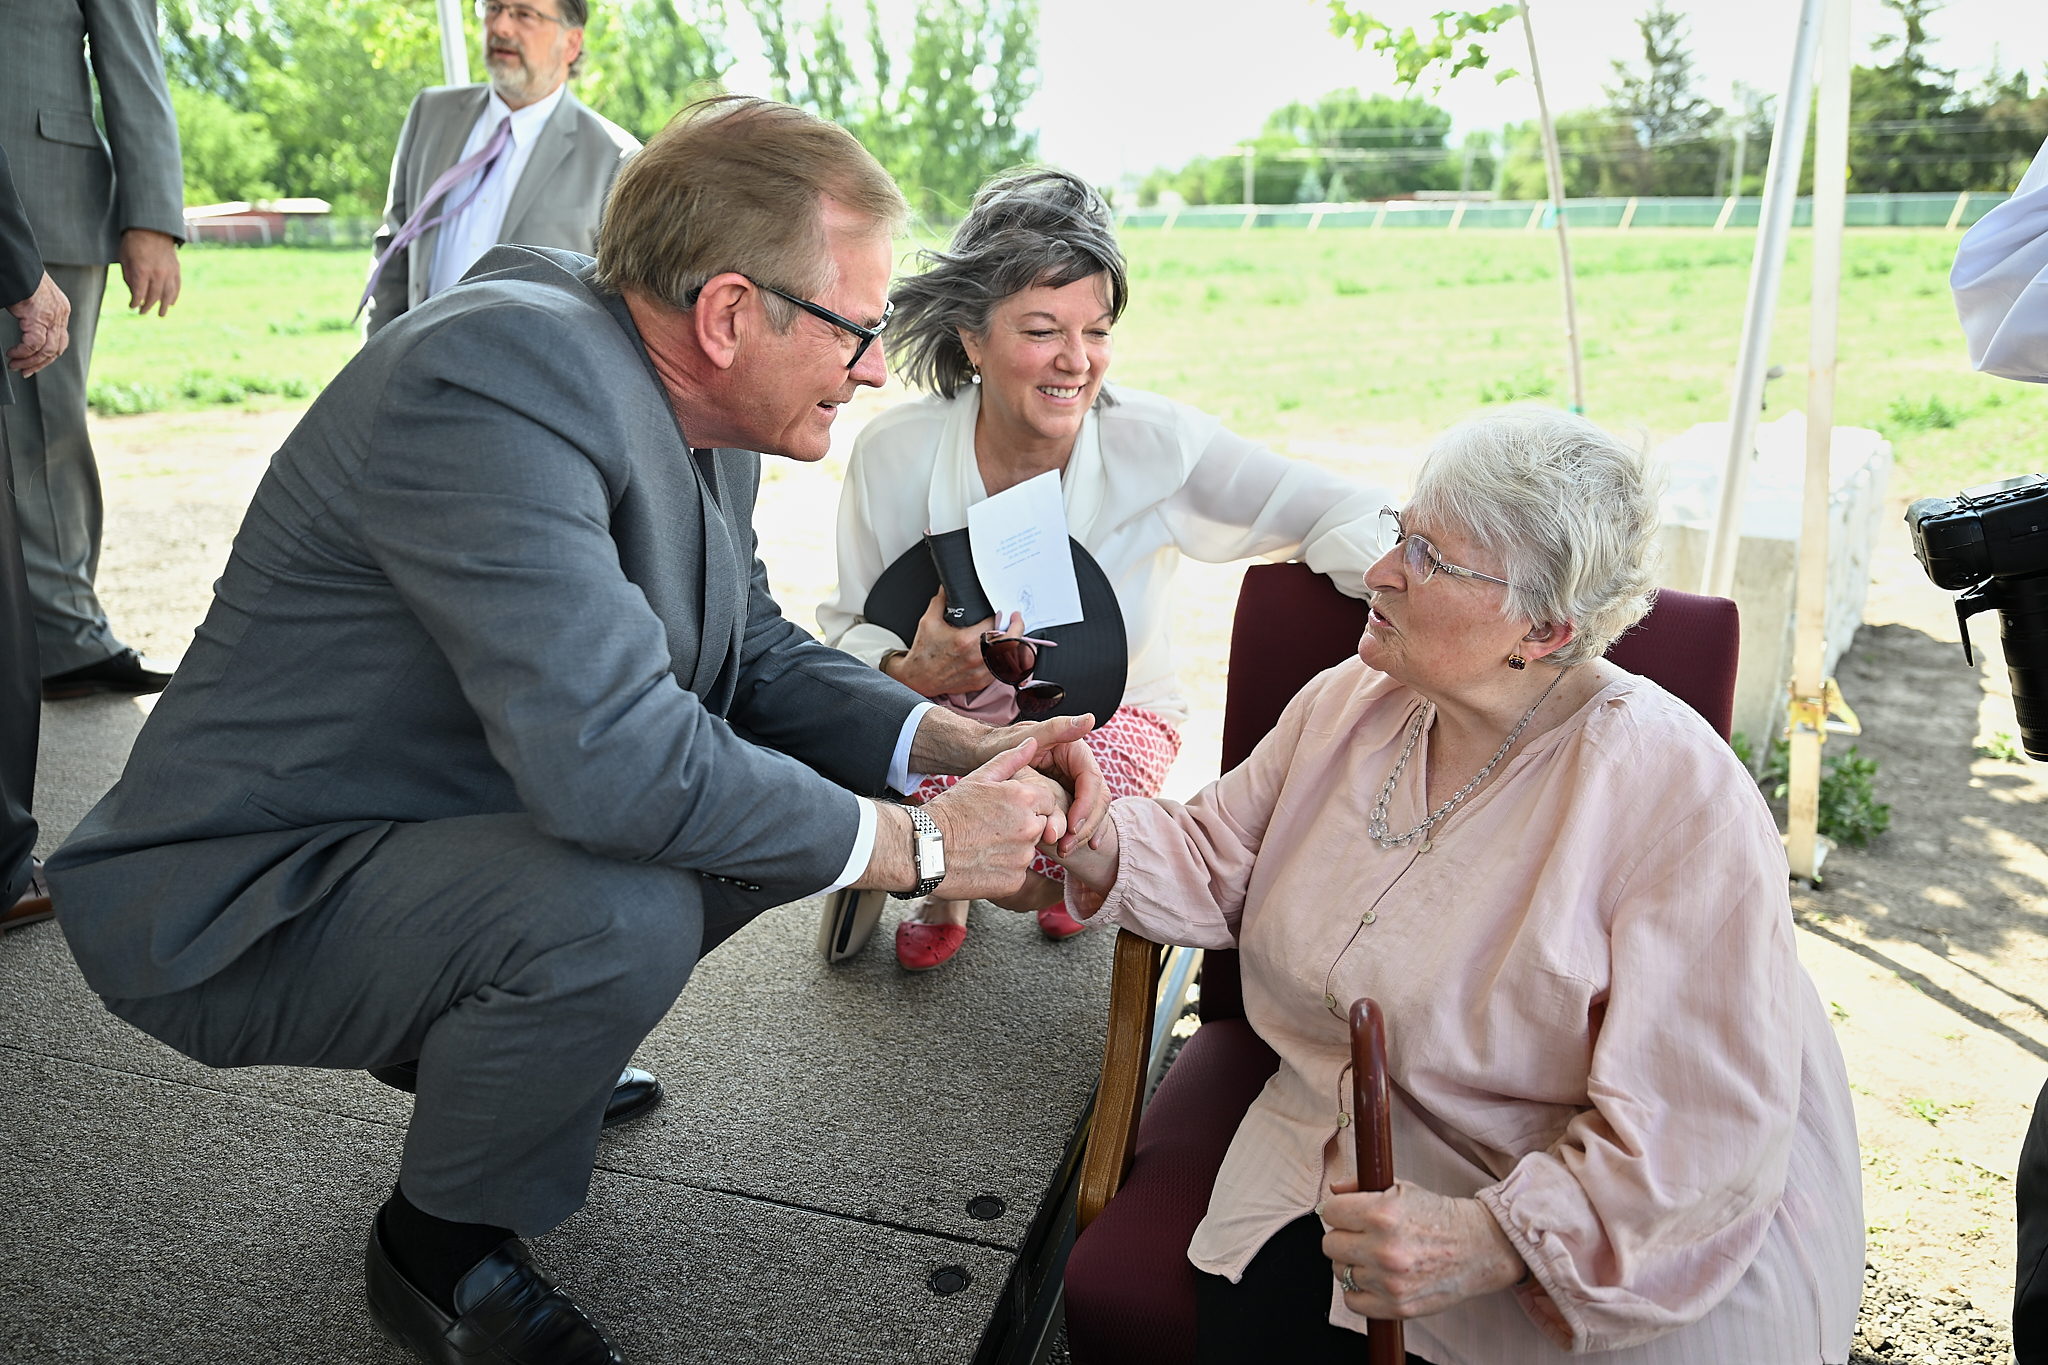 Elder Stevenson wearing a suit and shaking the hand of a woman in a pink dress sitting down.